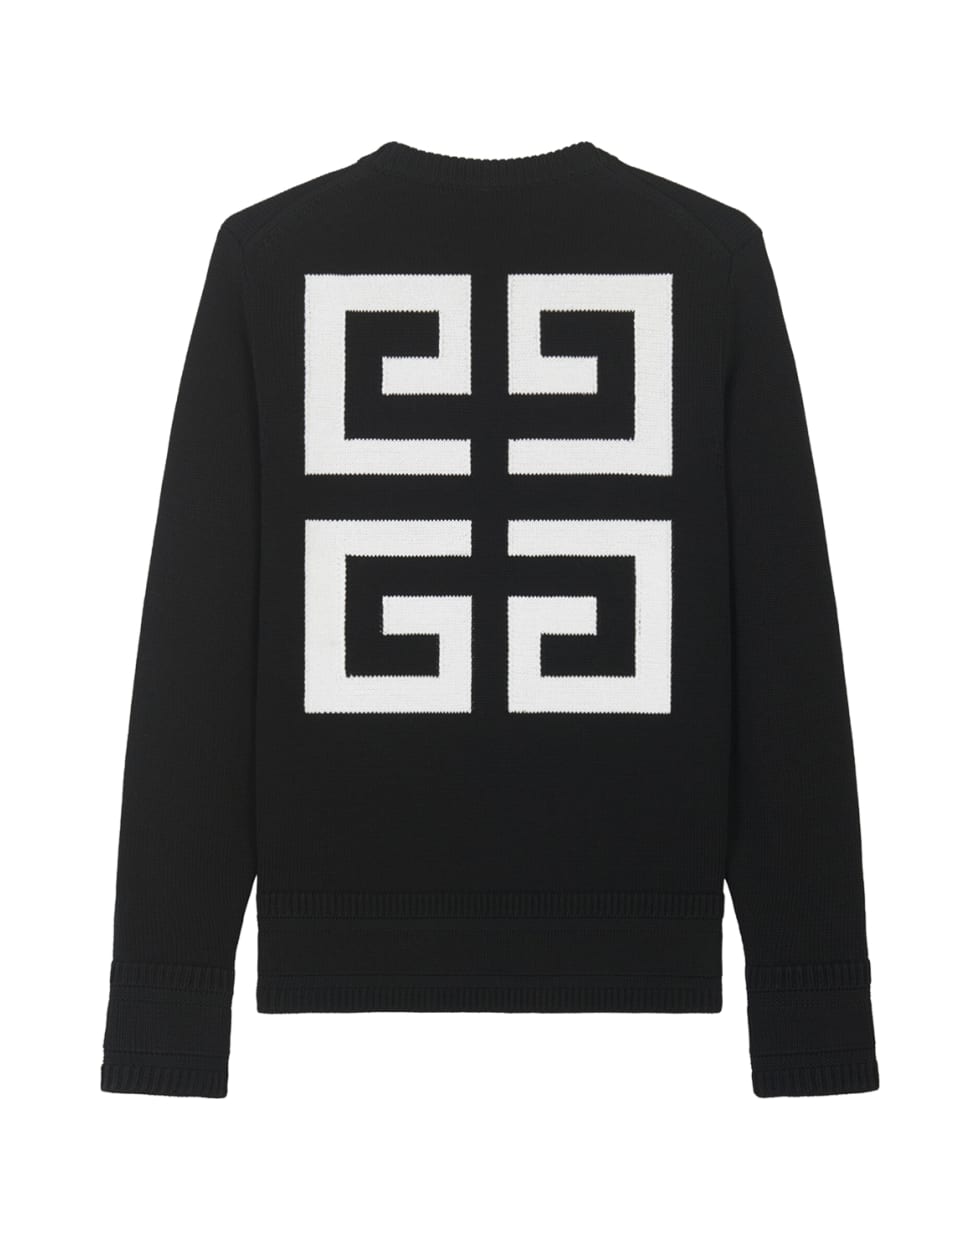 Givenchy 4g Crew Neck Sweater - Black